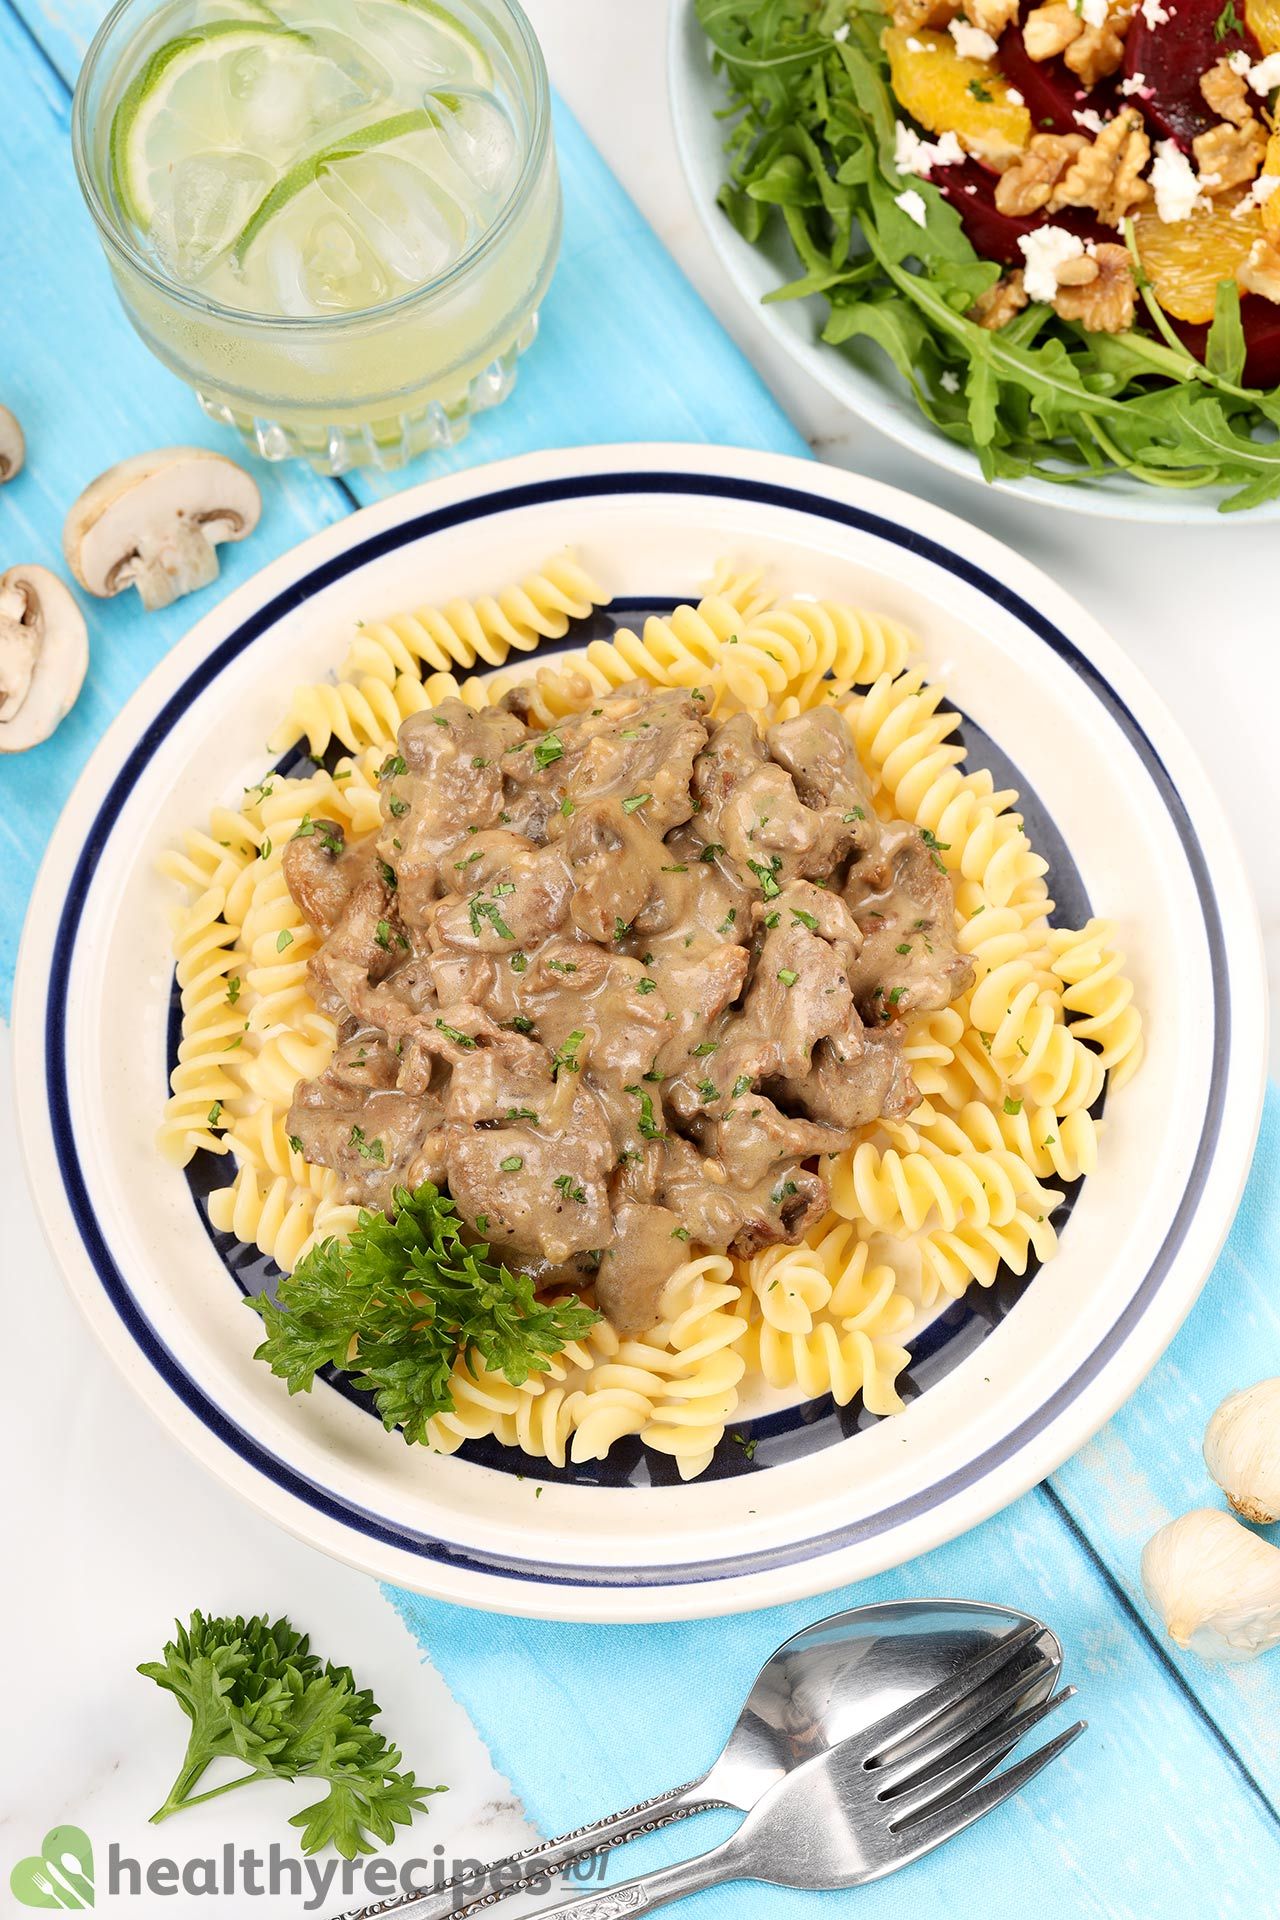 What to Serve With Beef Stroganoff